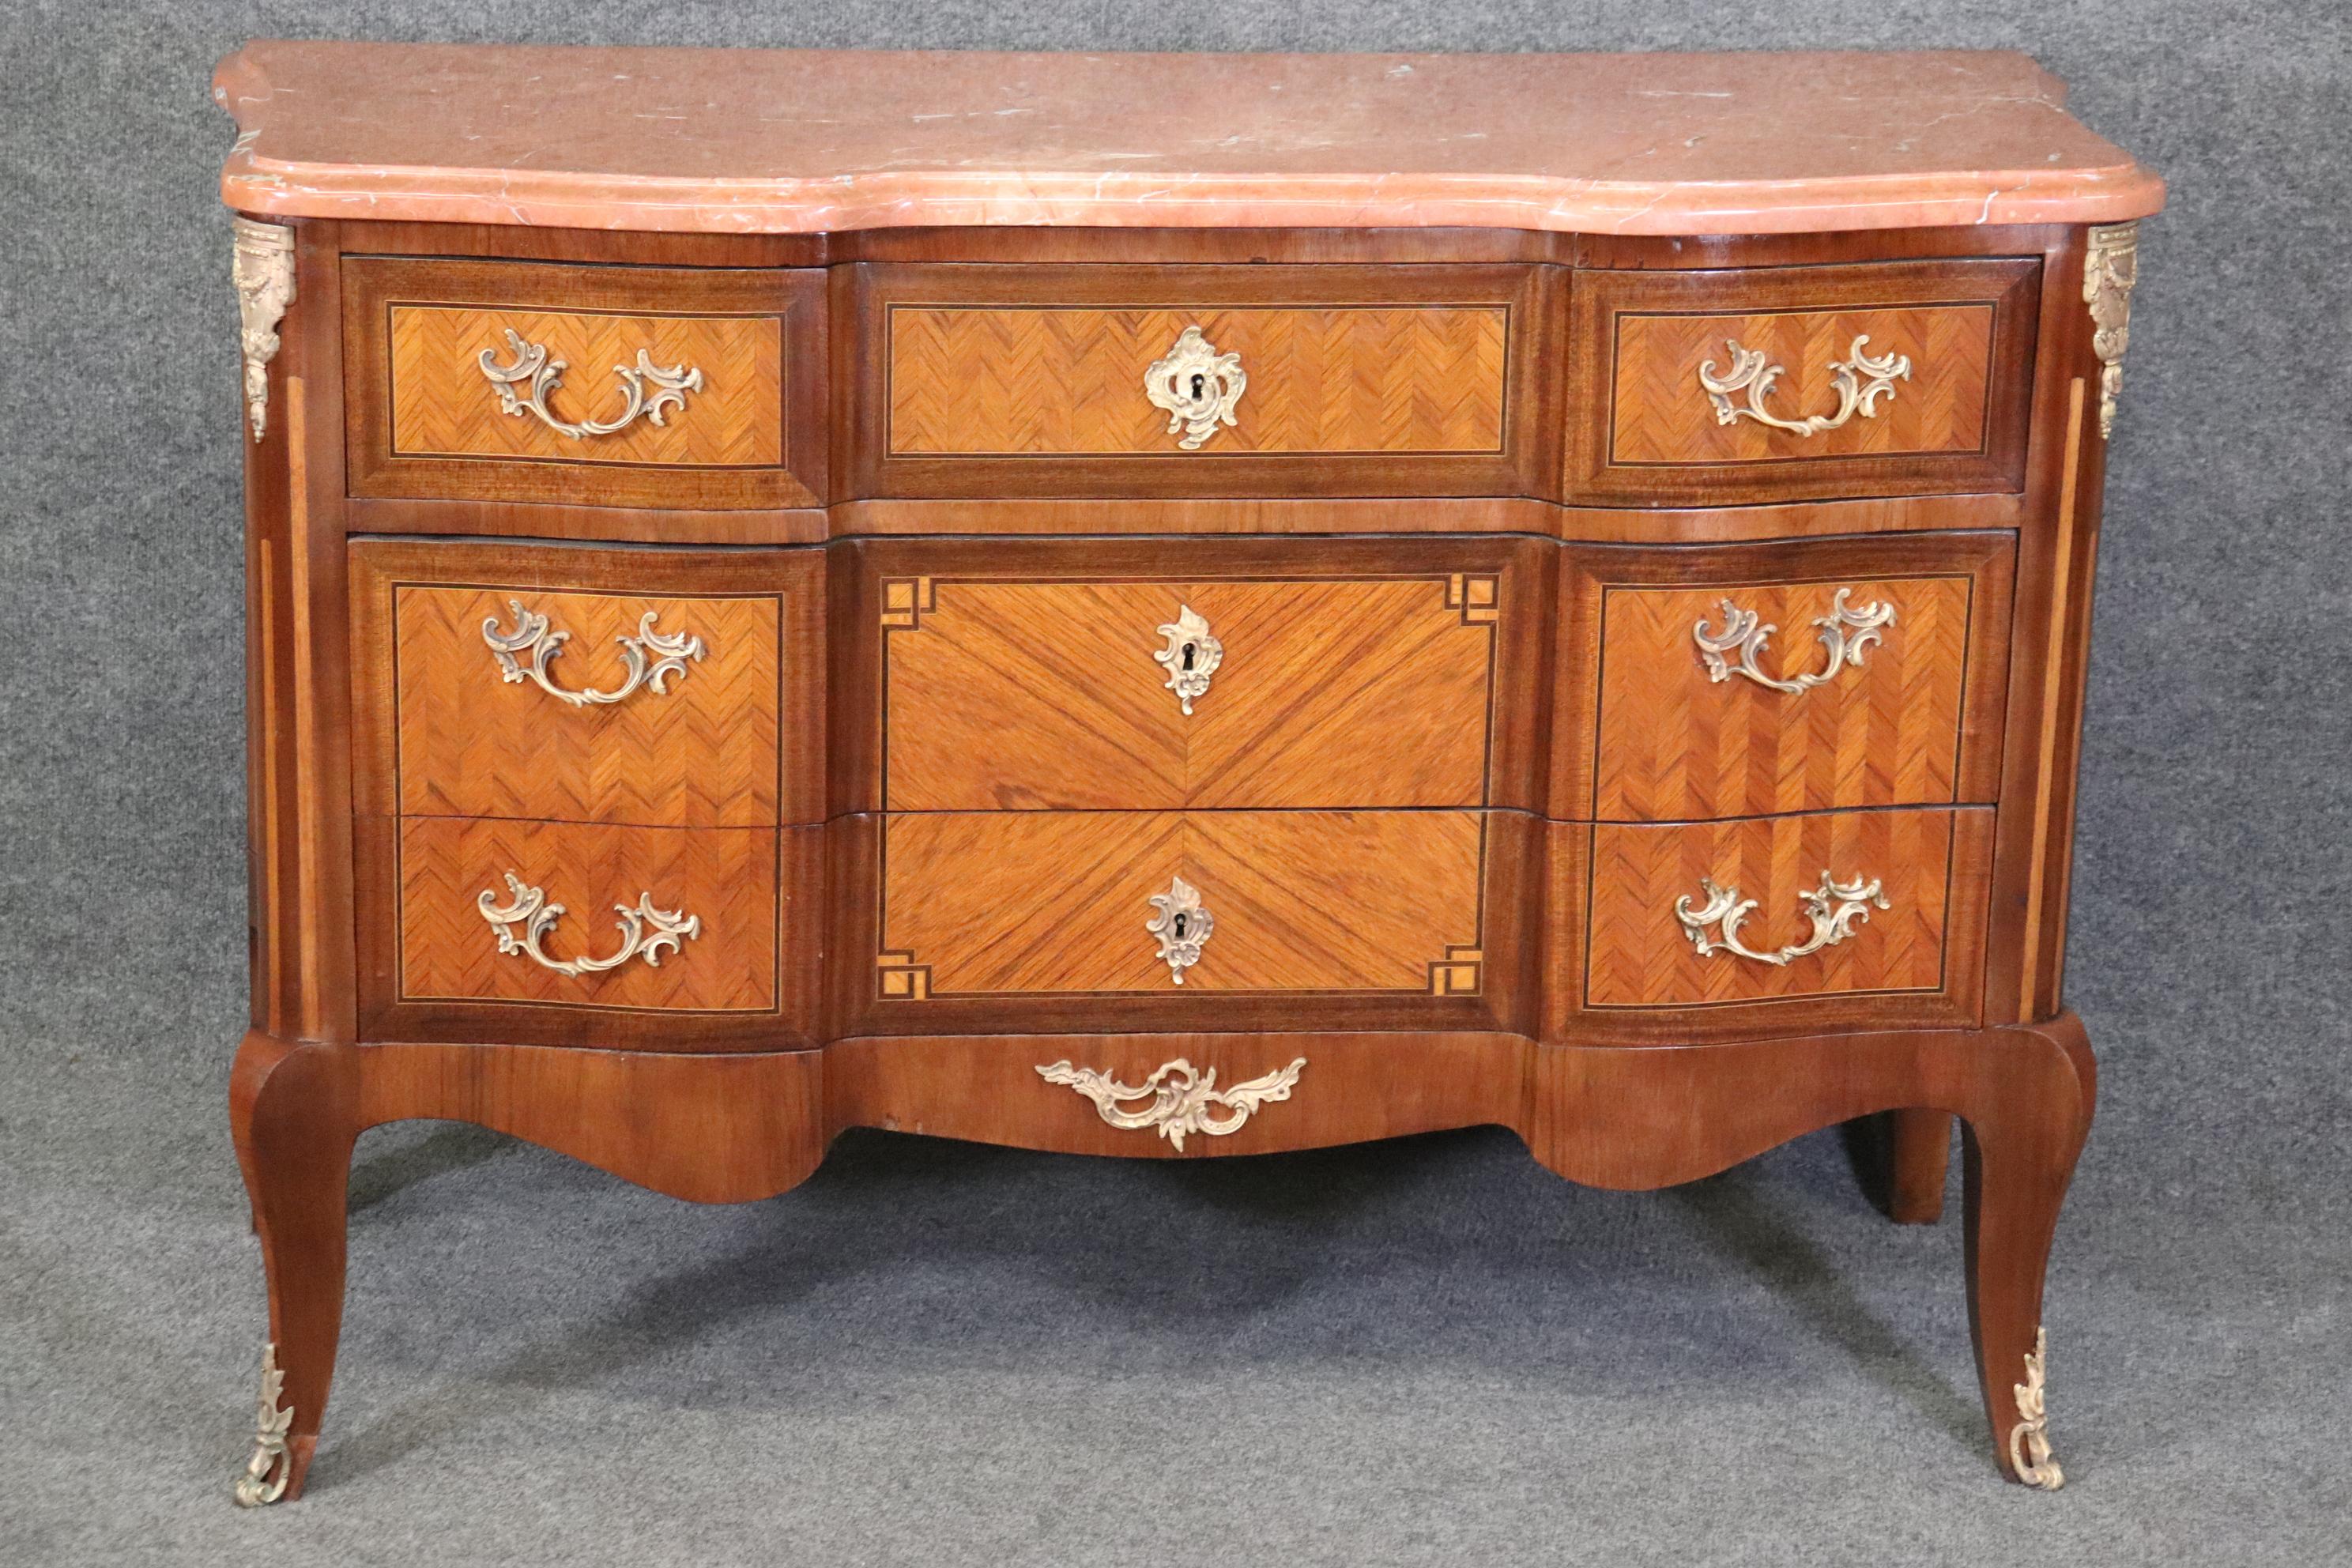 Dimensions: Height: 34 1/2 in Width: 50 1/2 in Depth: 21 1/4 in 

This antique 19th century French Louis XV Rococo style marble top commode, chest of drawers is a great example of quality French furniture! If you look at the photos provided, you